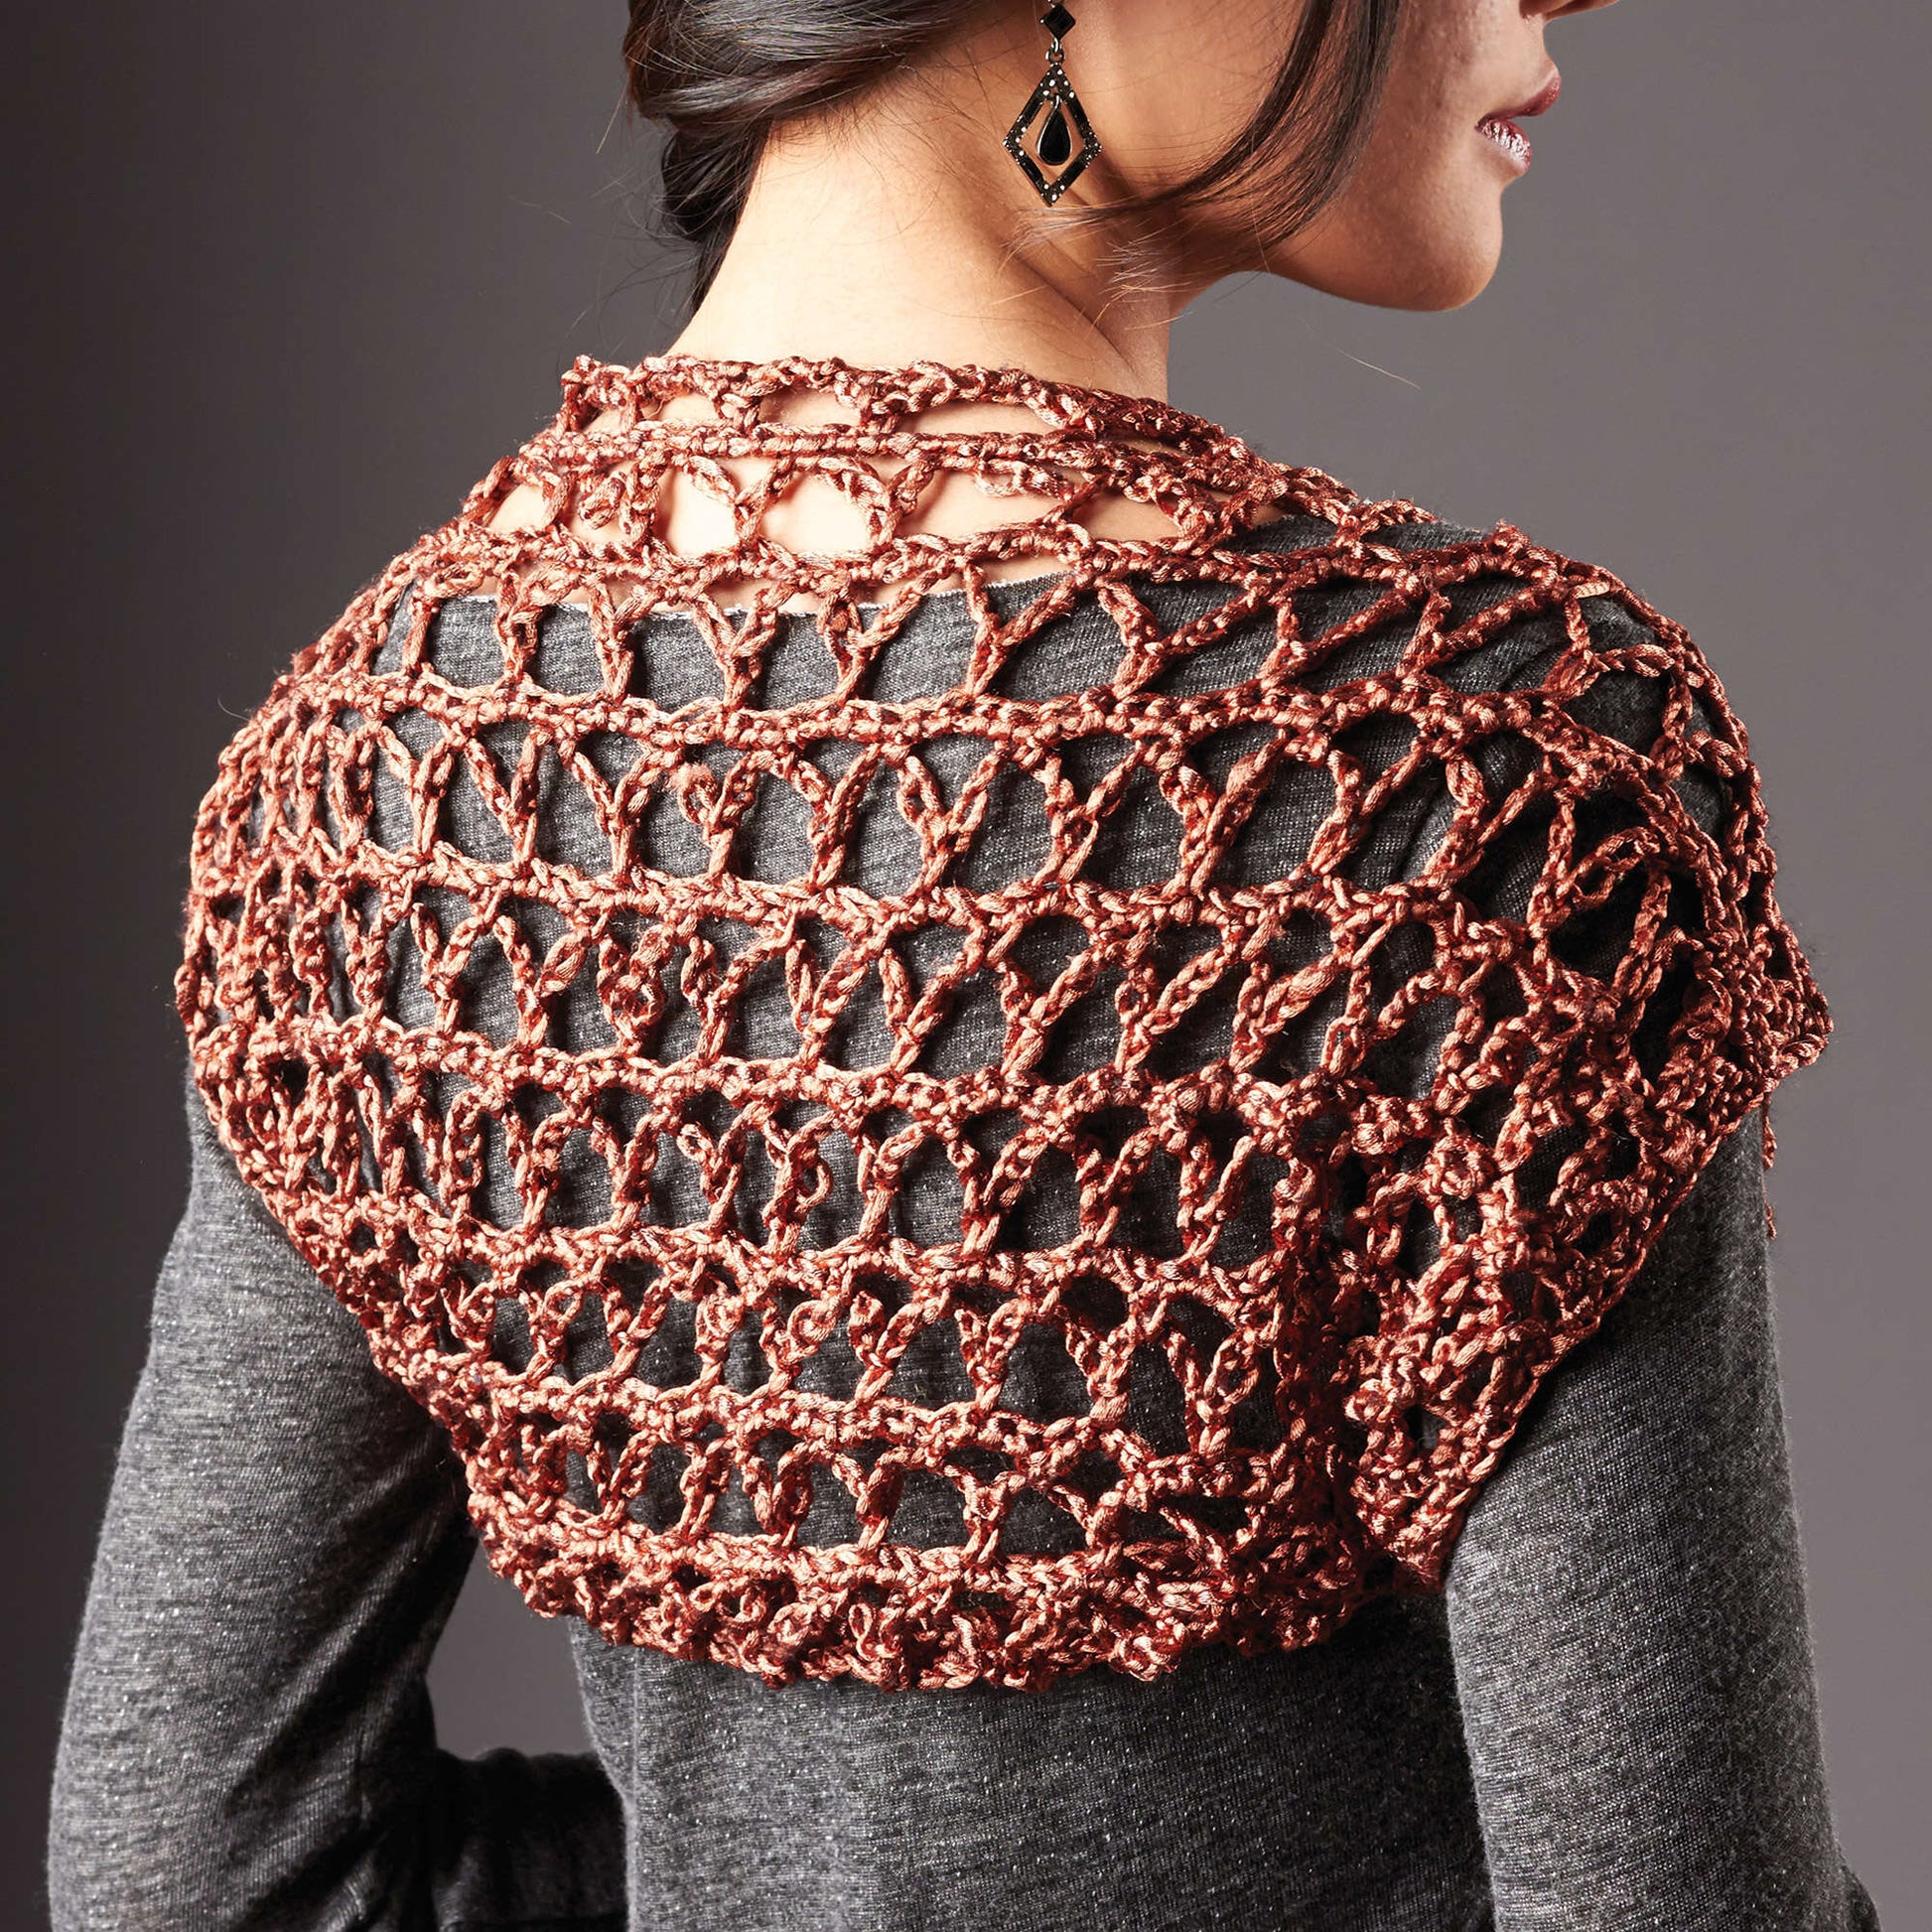 Free Patons Crochet Touch Of Shine Shrug Pattern